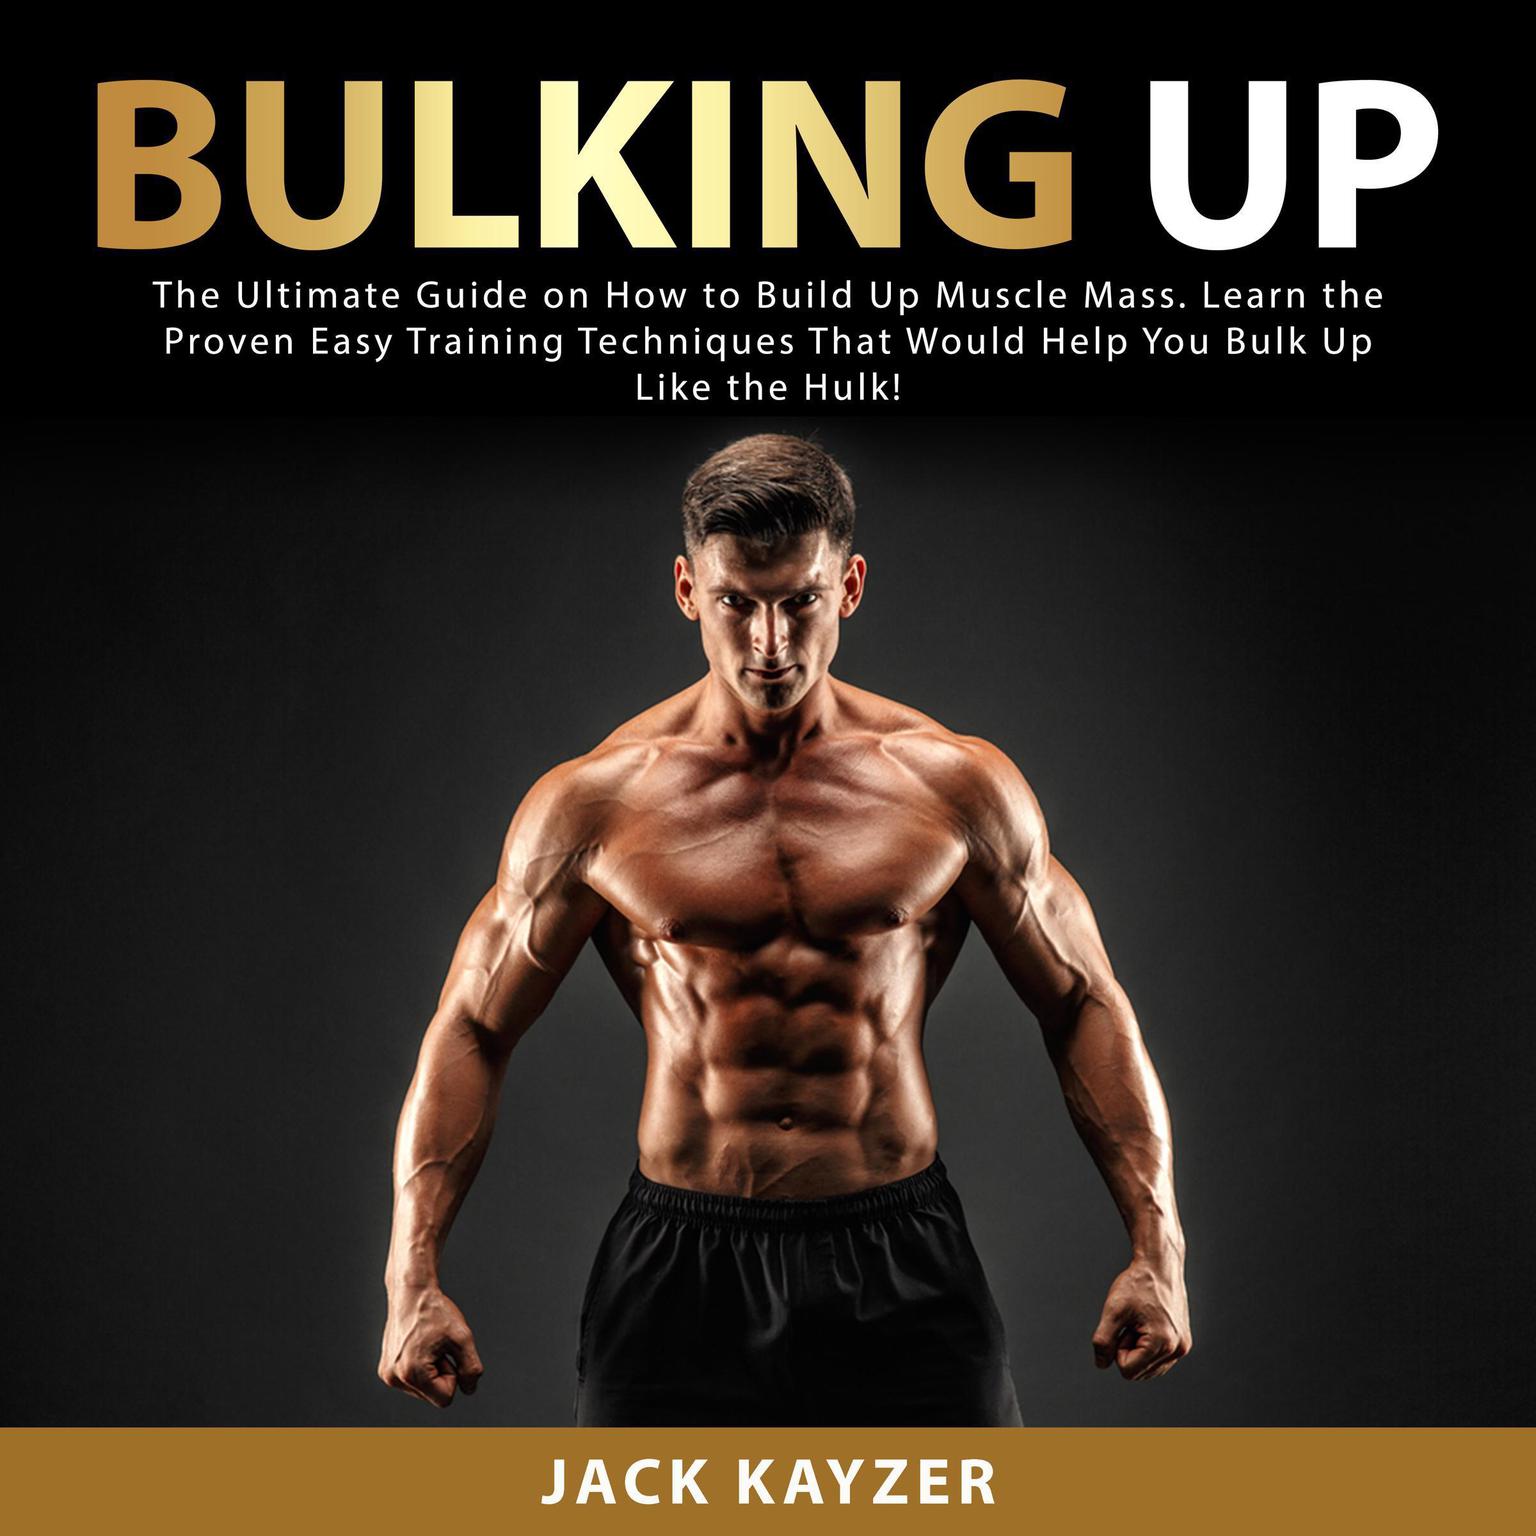 Bulking up: The Ultimate Guide on How to Build Up Muscle Mass. Learn the Proven Easy Training Techniques That Would Help You Bulk Up Like the Hulk! Audiobook, by Jack Kayzer